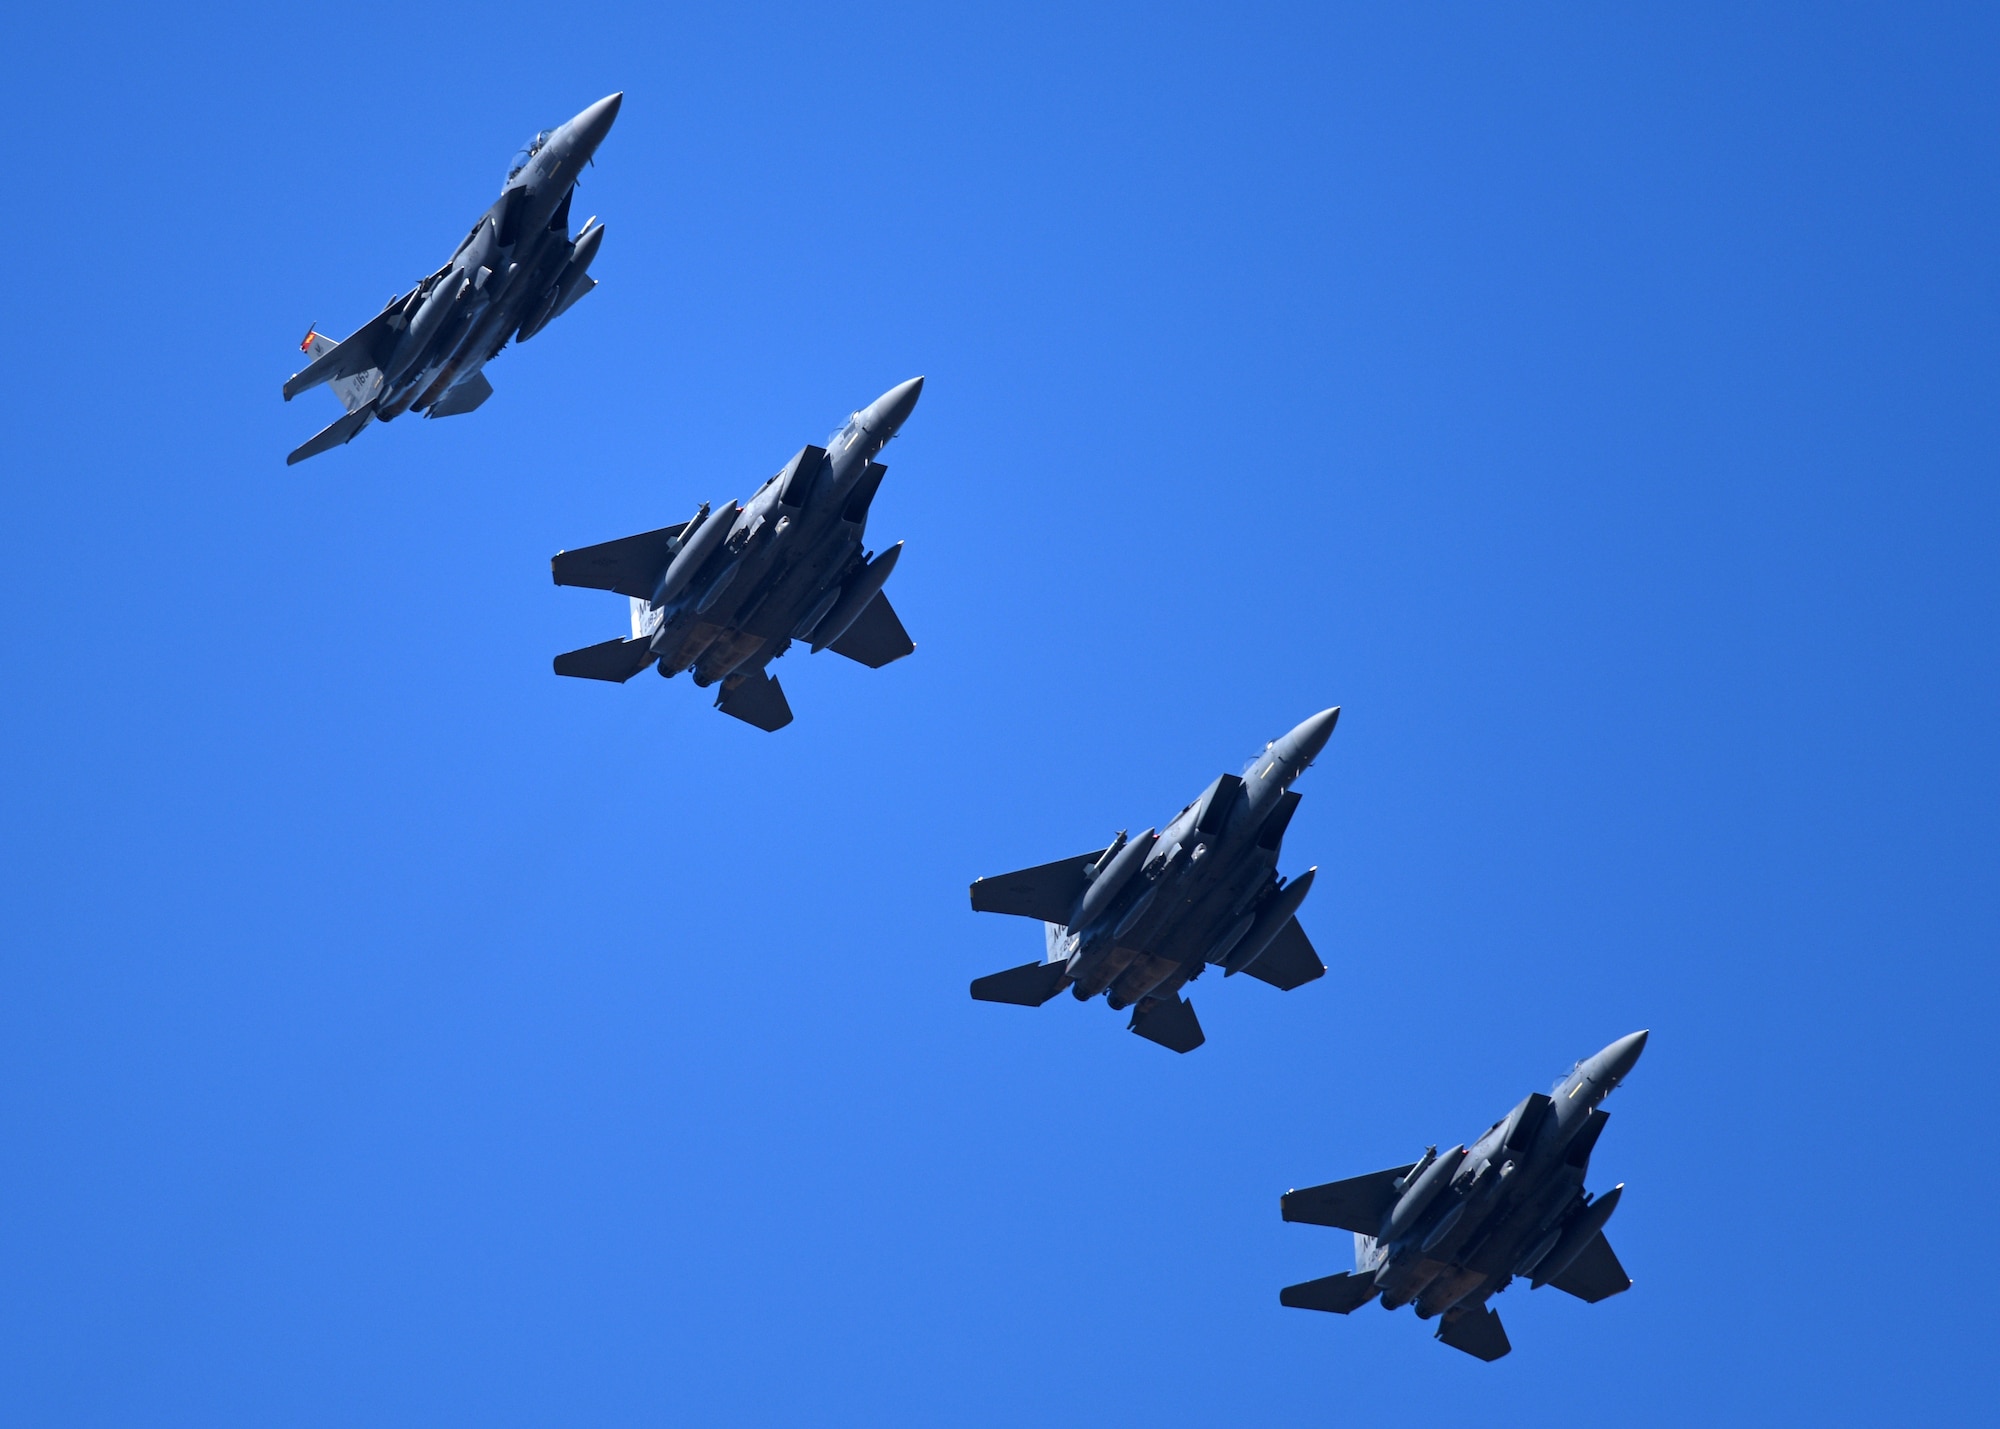 Four U.S. Air Force F-15E Strike Eagles from the 389th Fighter Squadron, Mountain Home Air Force Base, Idaho, soar over Tyndall Air Force Base, Fla., Nov. 3, 2017. Mountain Home AFB sent assets to Tyndall to participate in exercise Checkered Flag 18-1 and Combat Archer. (U.S. Air Force photo by Airman 1st Class Isaiah J. Soliz/Released)